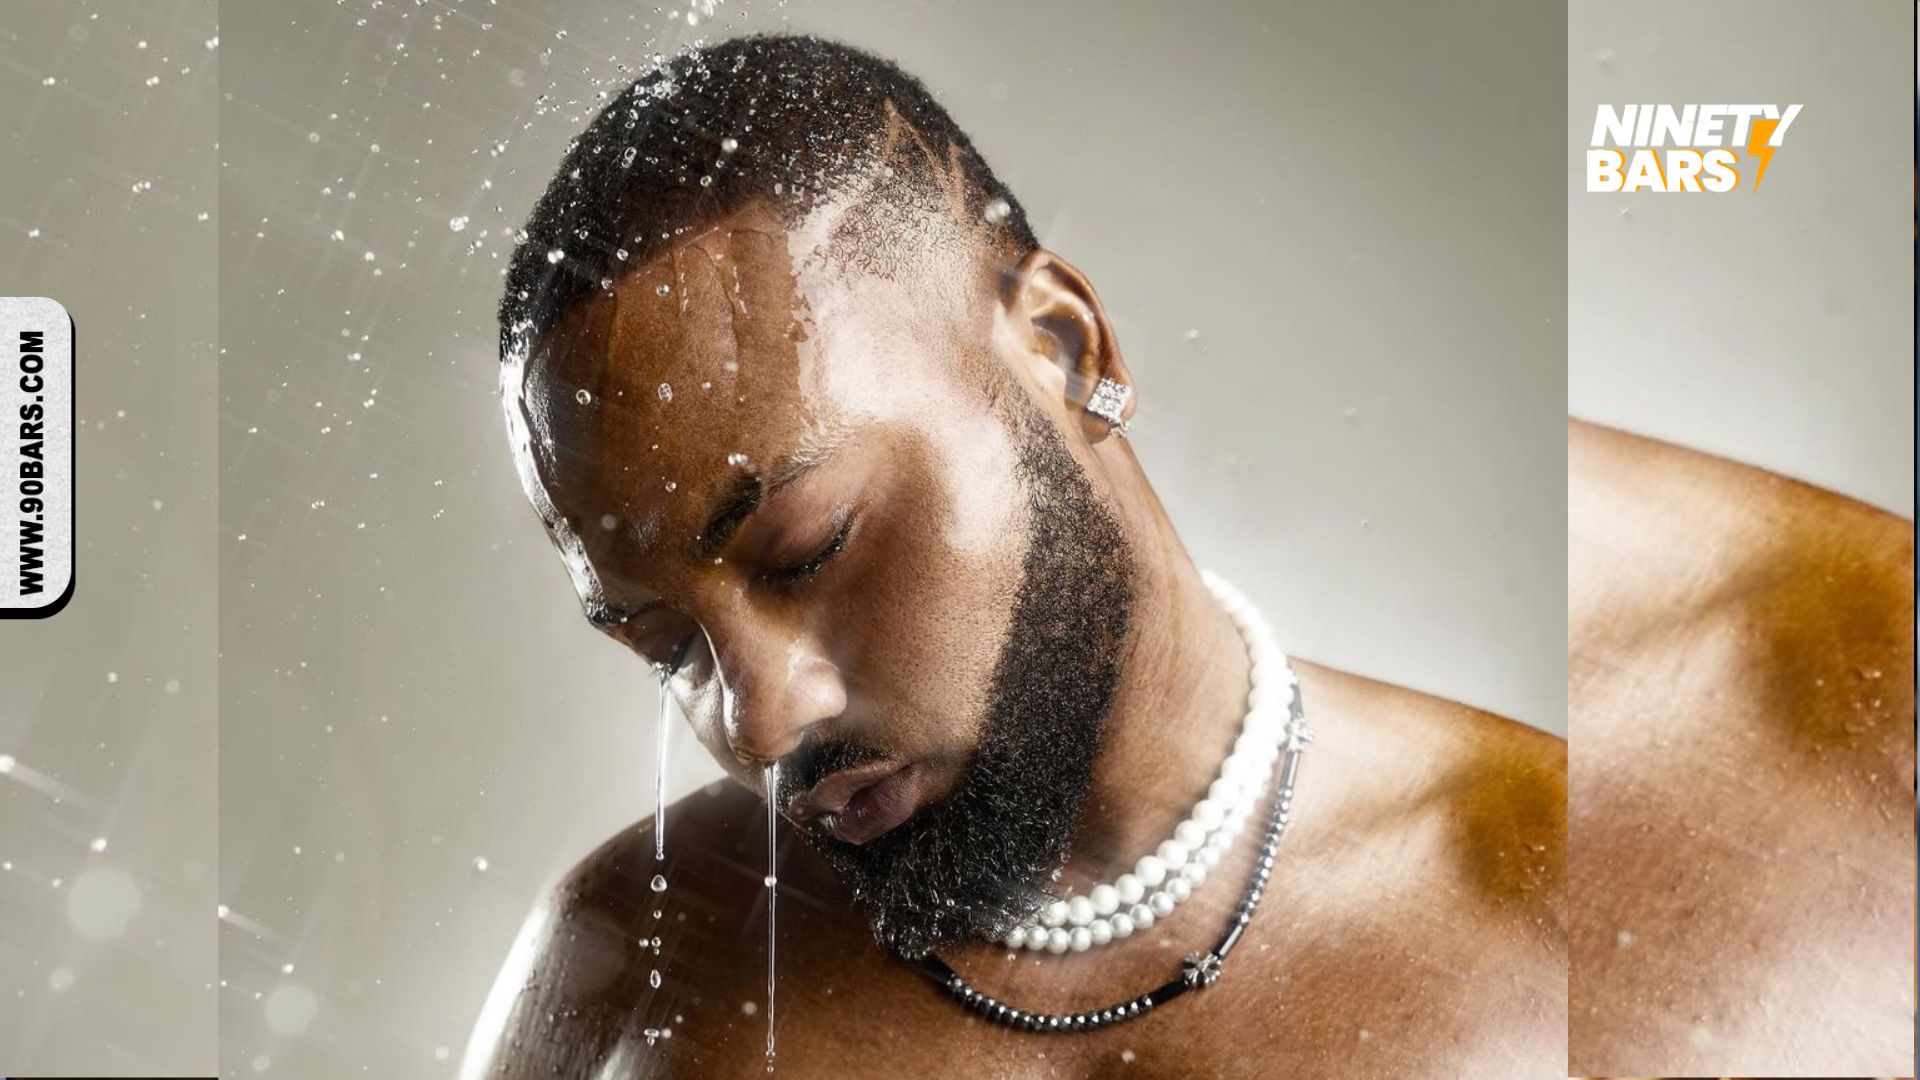 For his new single "Duro," Nanky releases a gust of seduction in the music video.